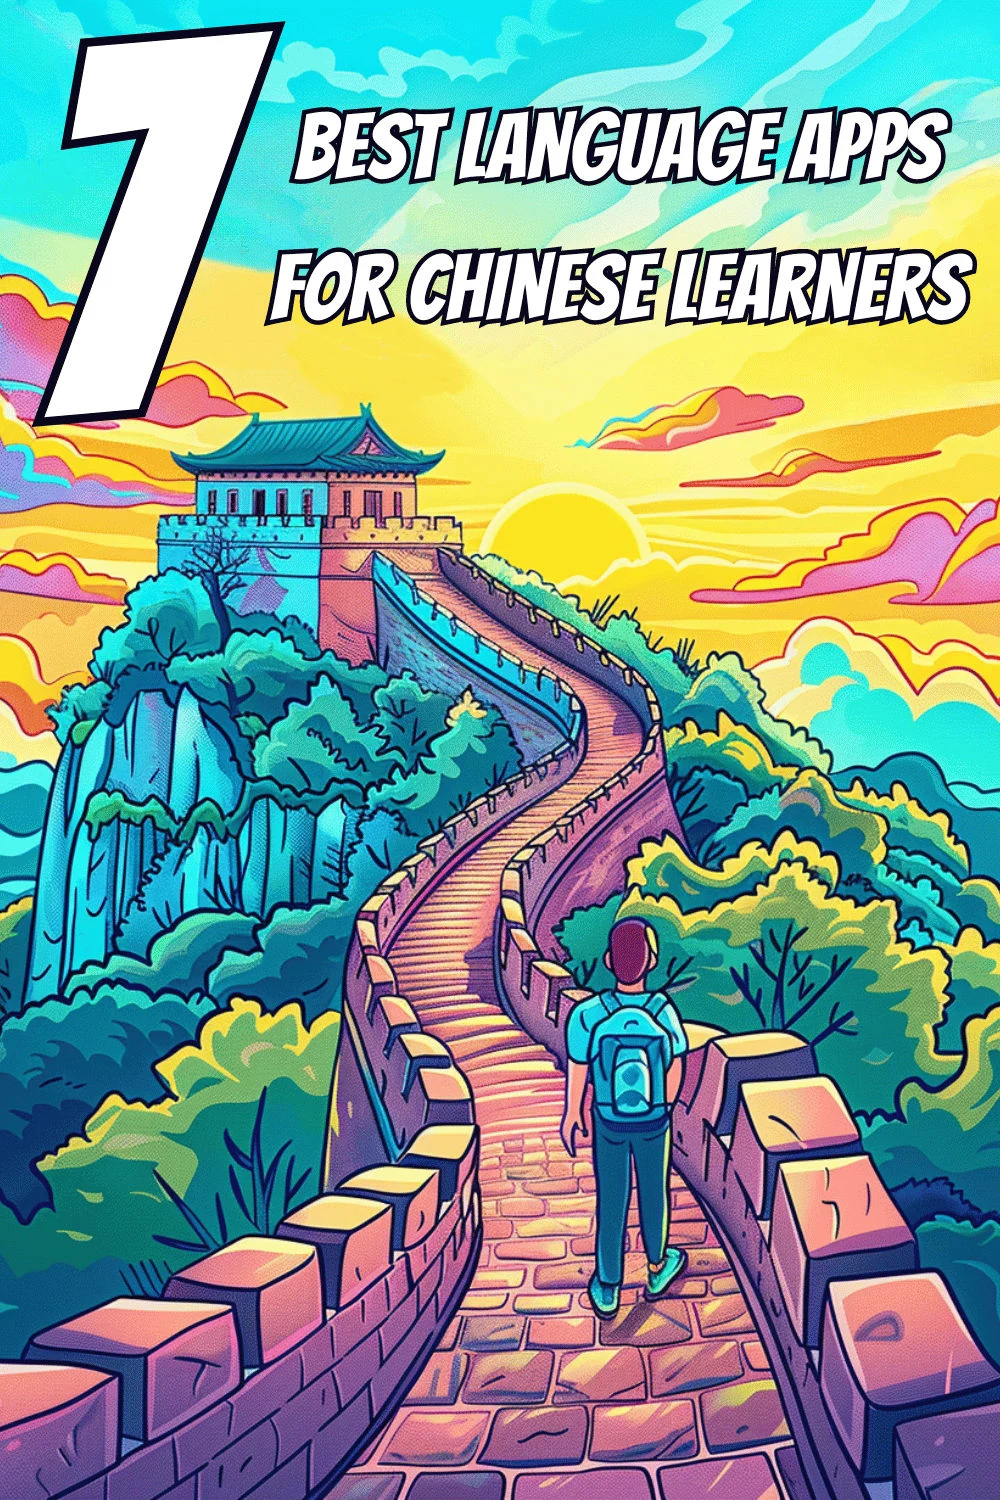 The image shows an illustration of the great wall of China. 